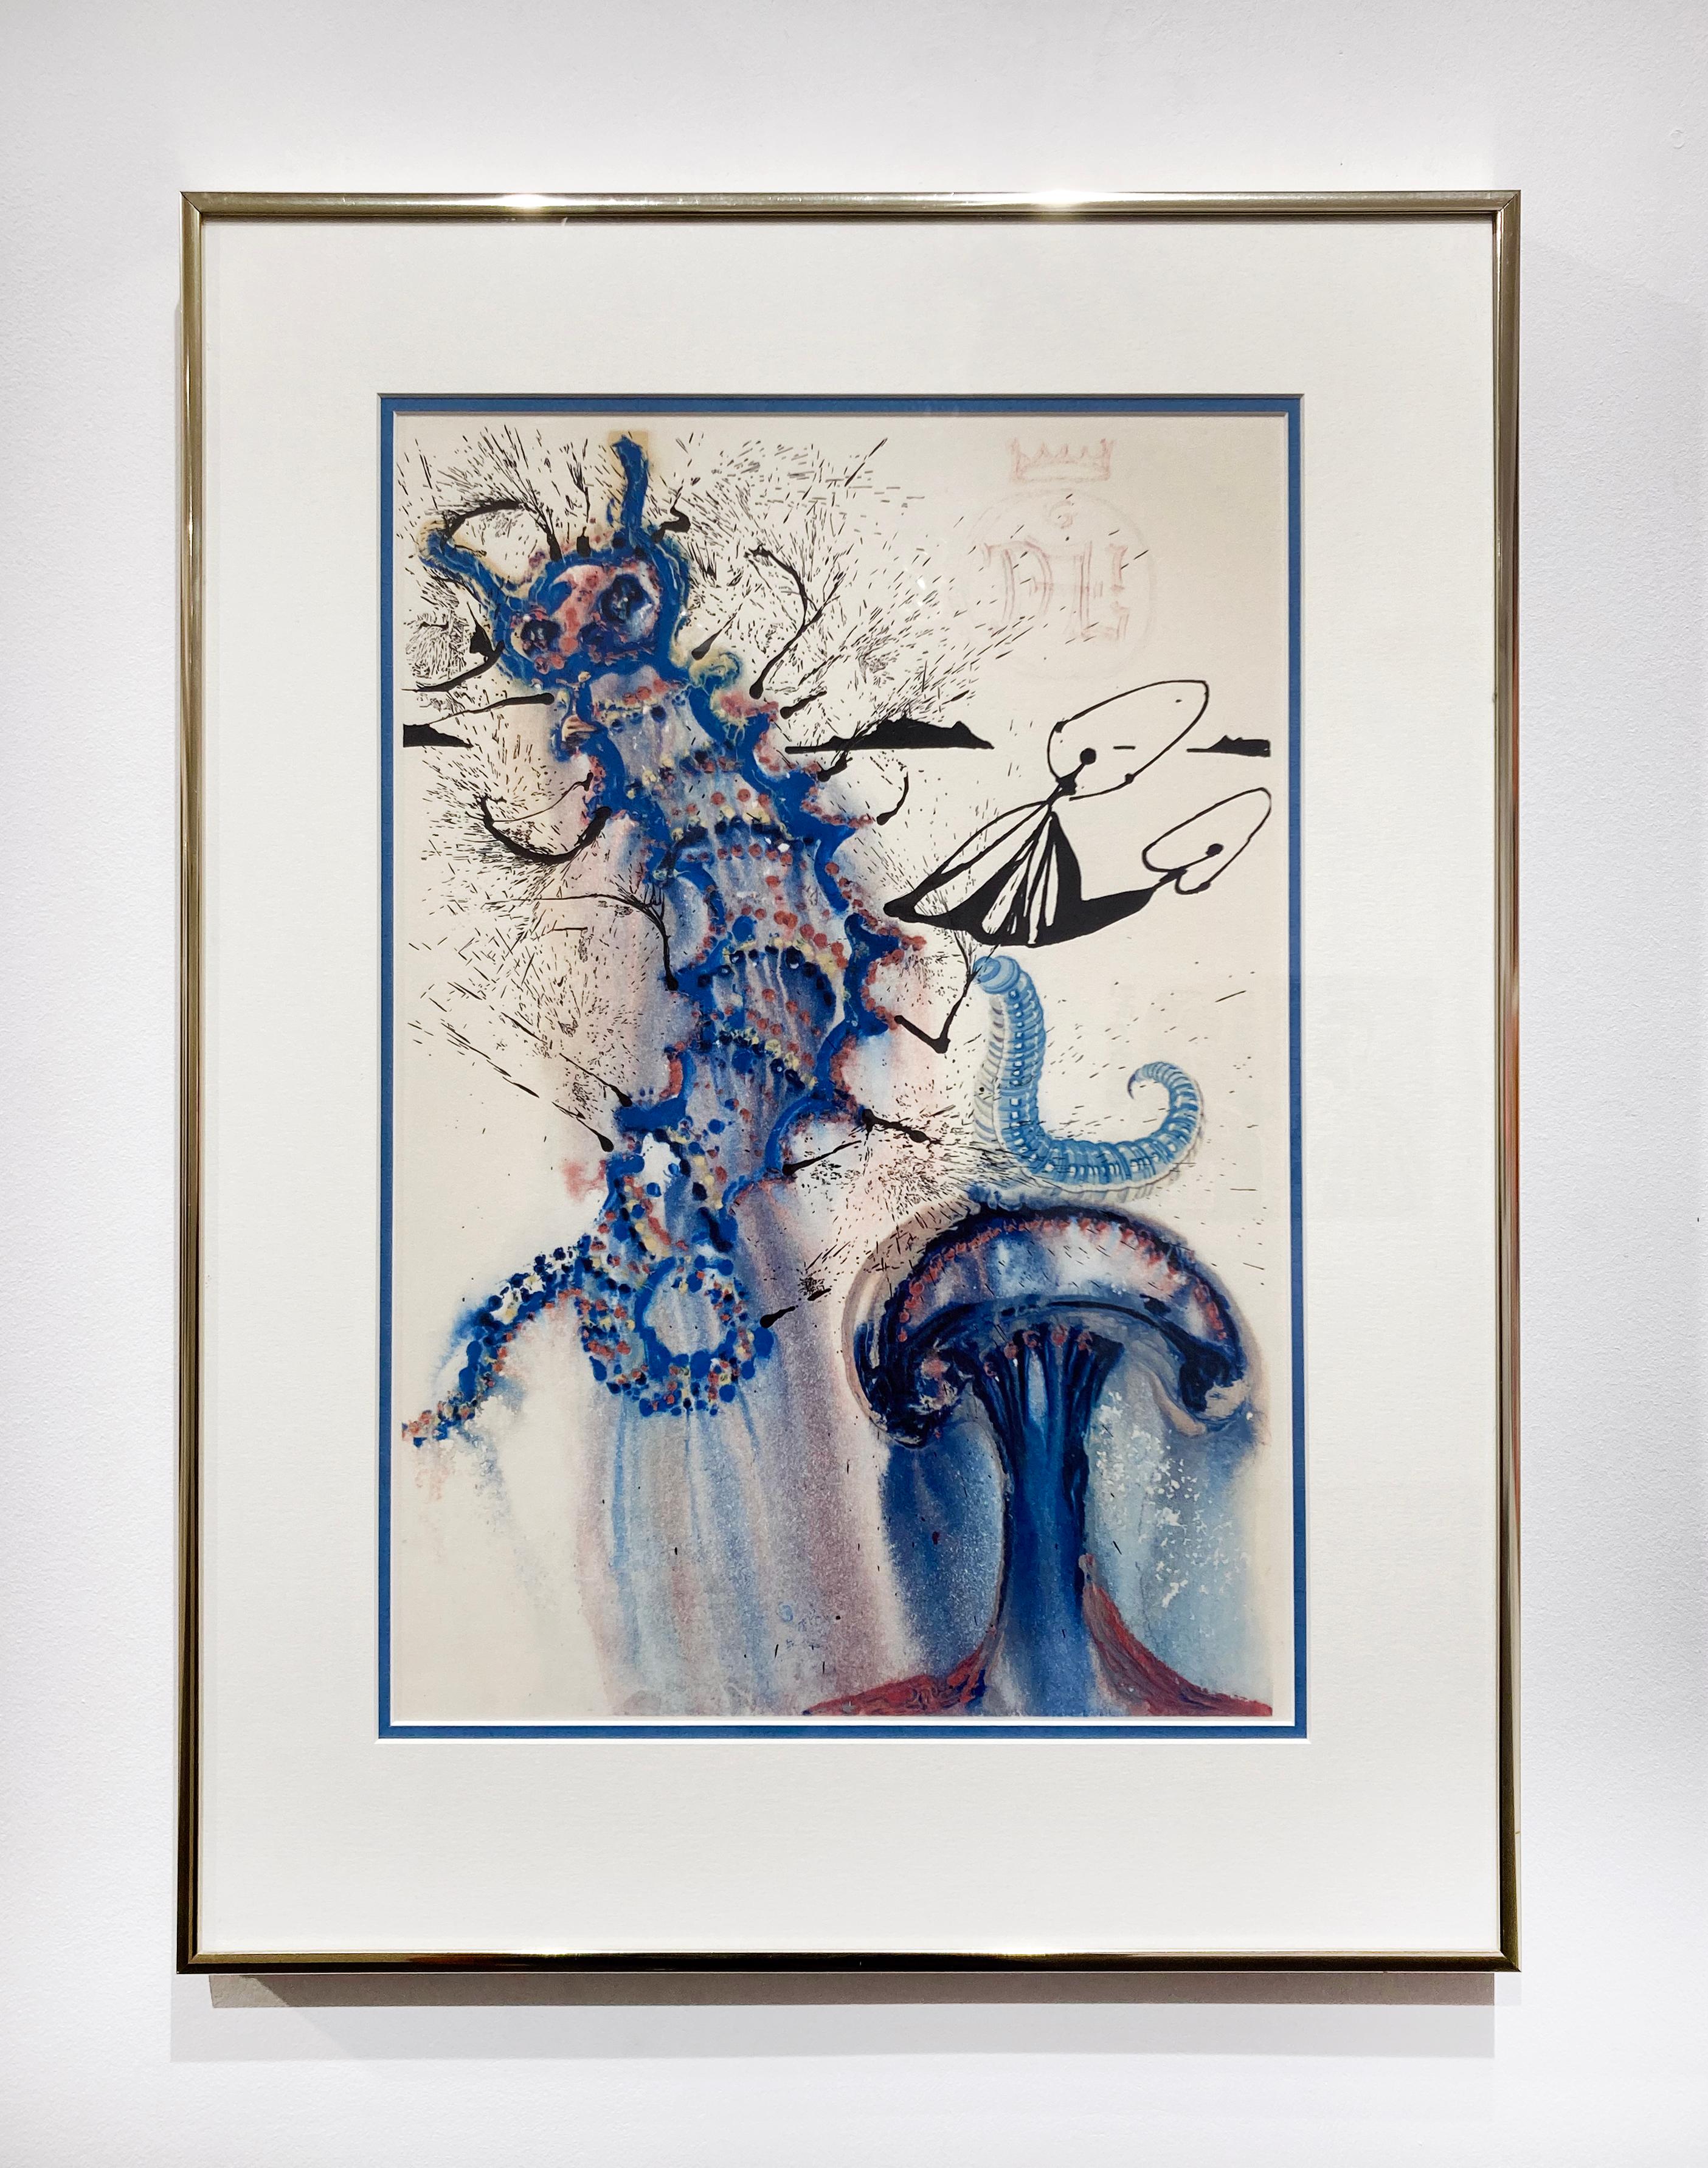 Advice From a Caterpillar - Surrealist Print by Salvador Dalí